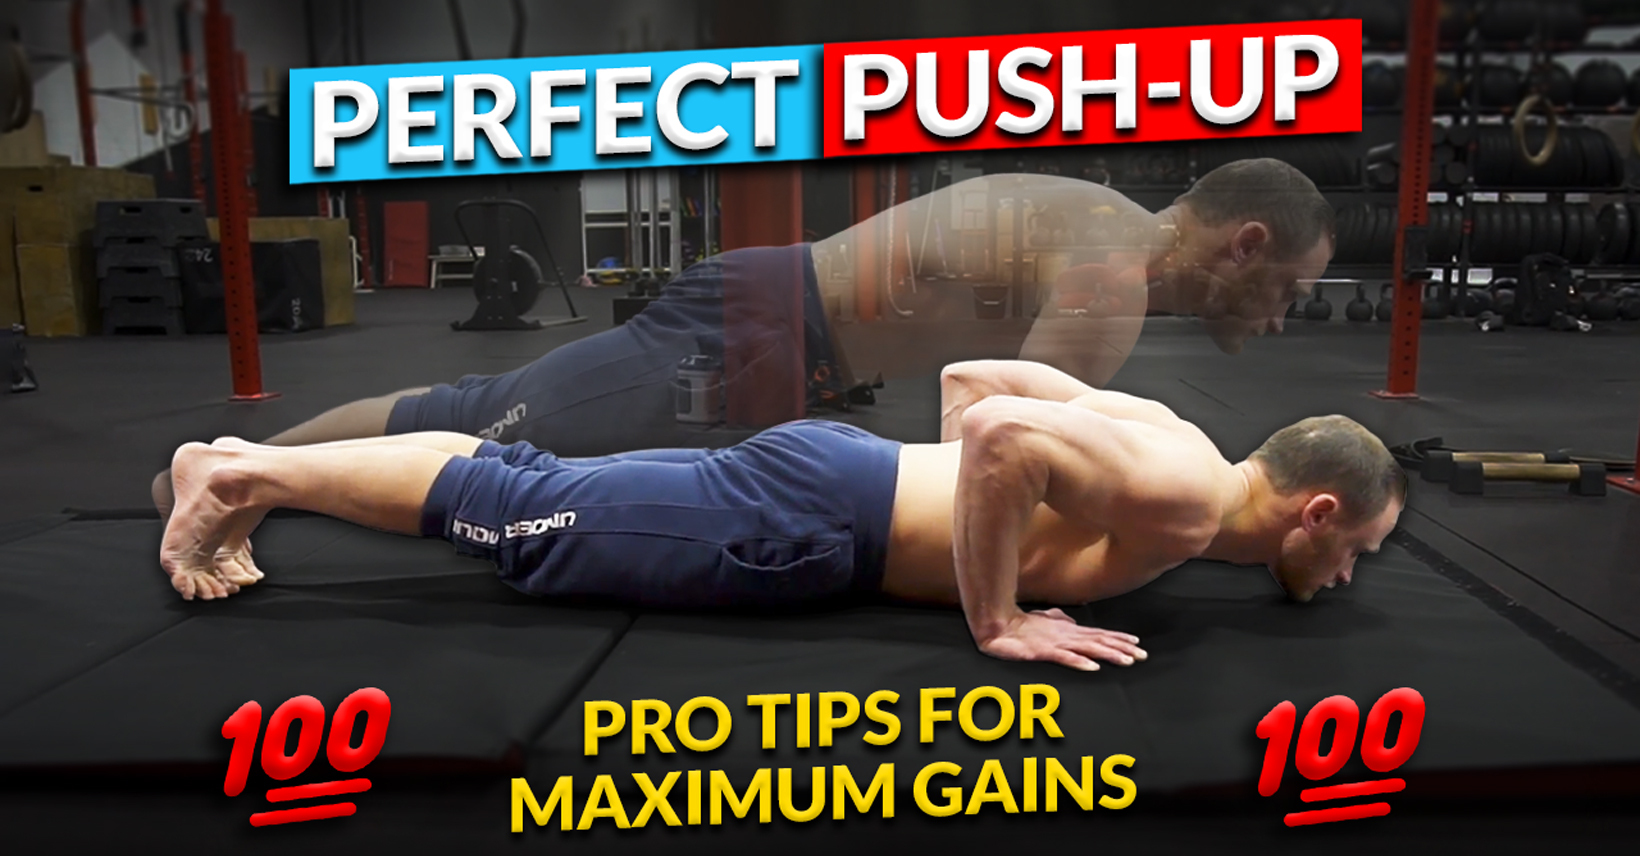 How to Do Perfect Push-up: The Ultimate Guide for Maximum Gains and Explosive Strength